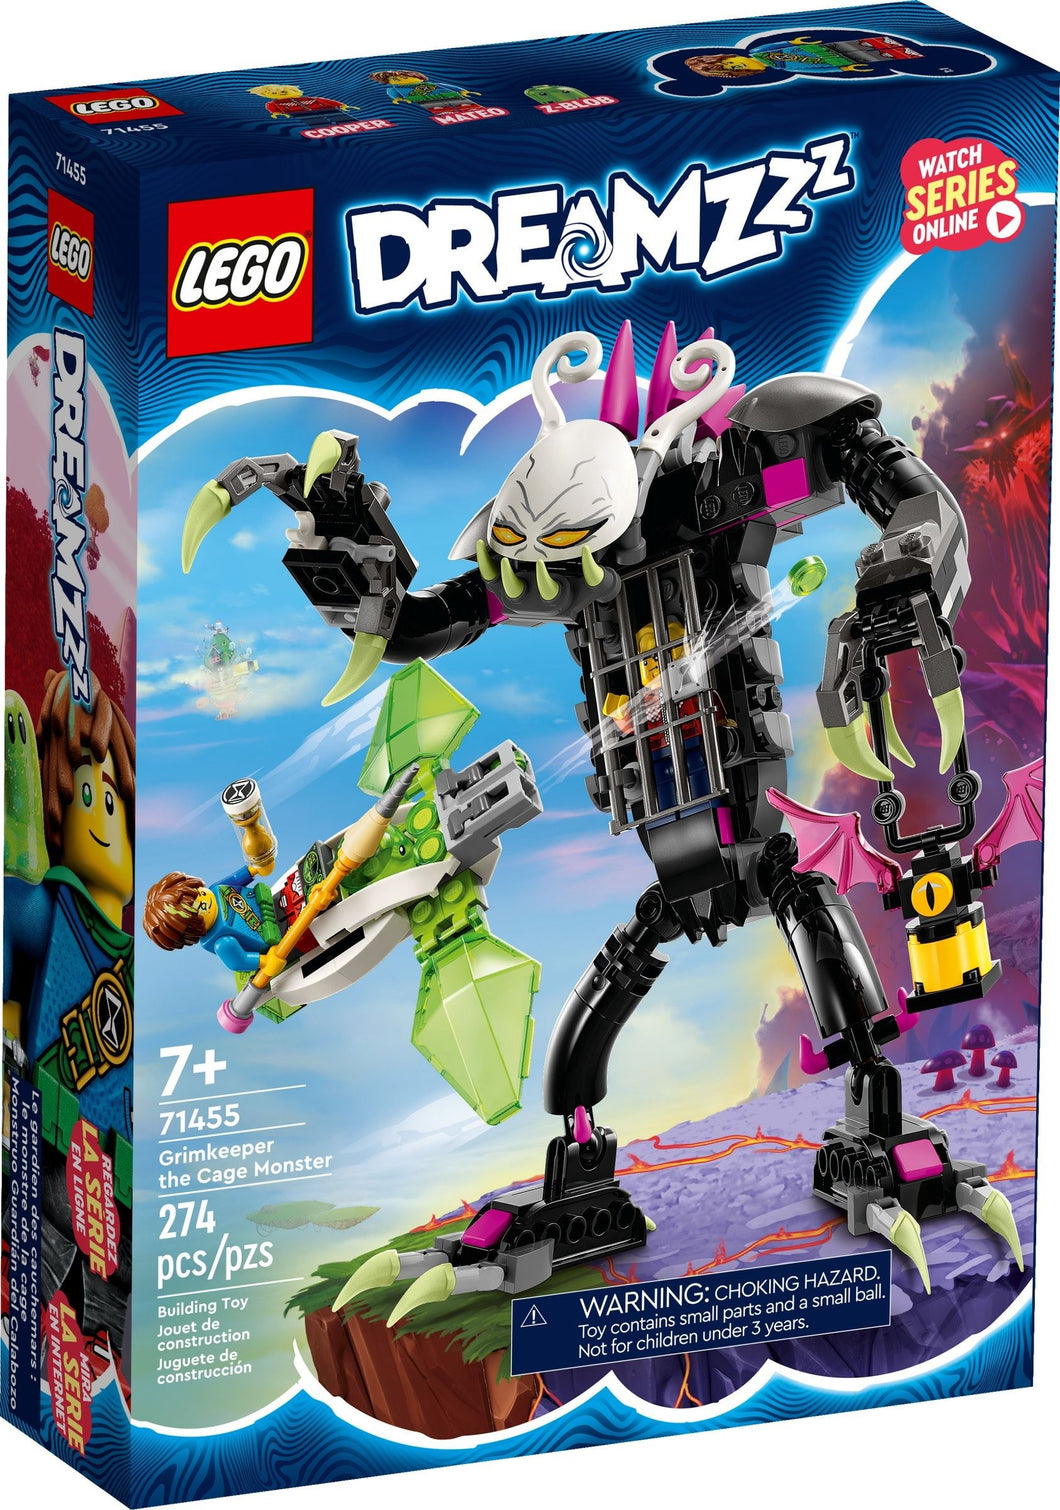 LEGO 71455: Dreamzzz: Grimkeeper the Cage Monster